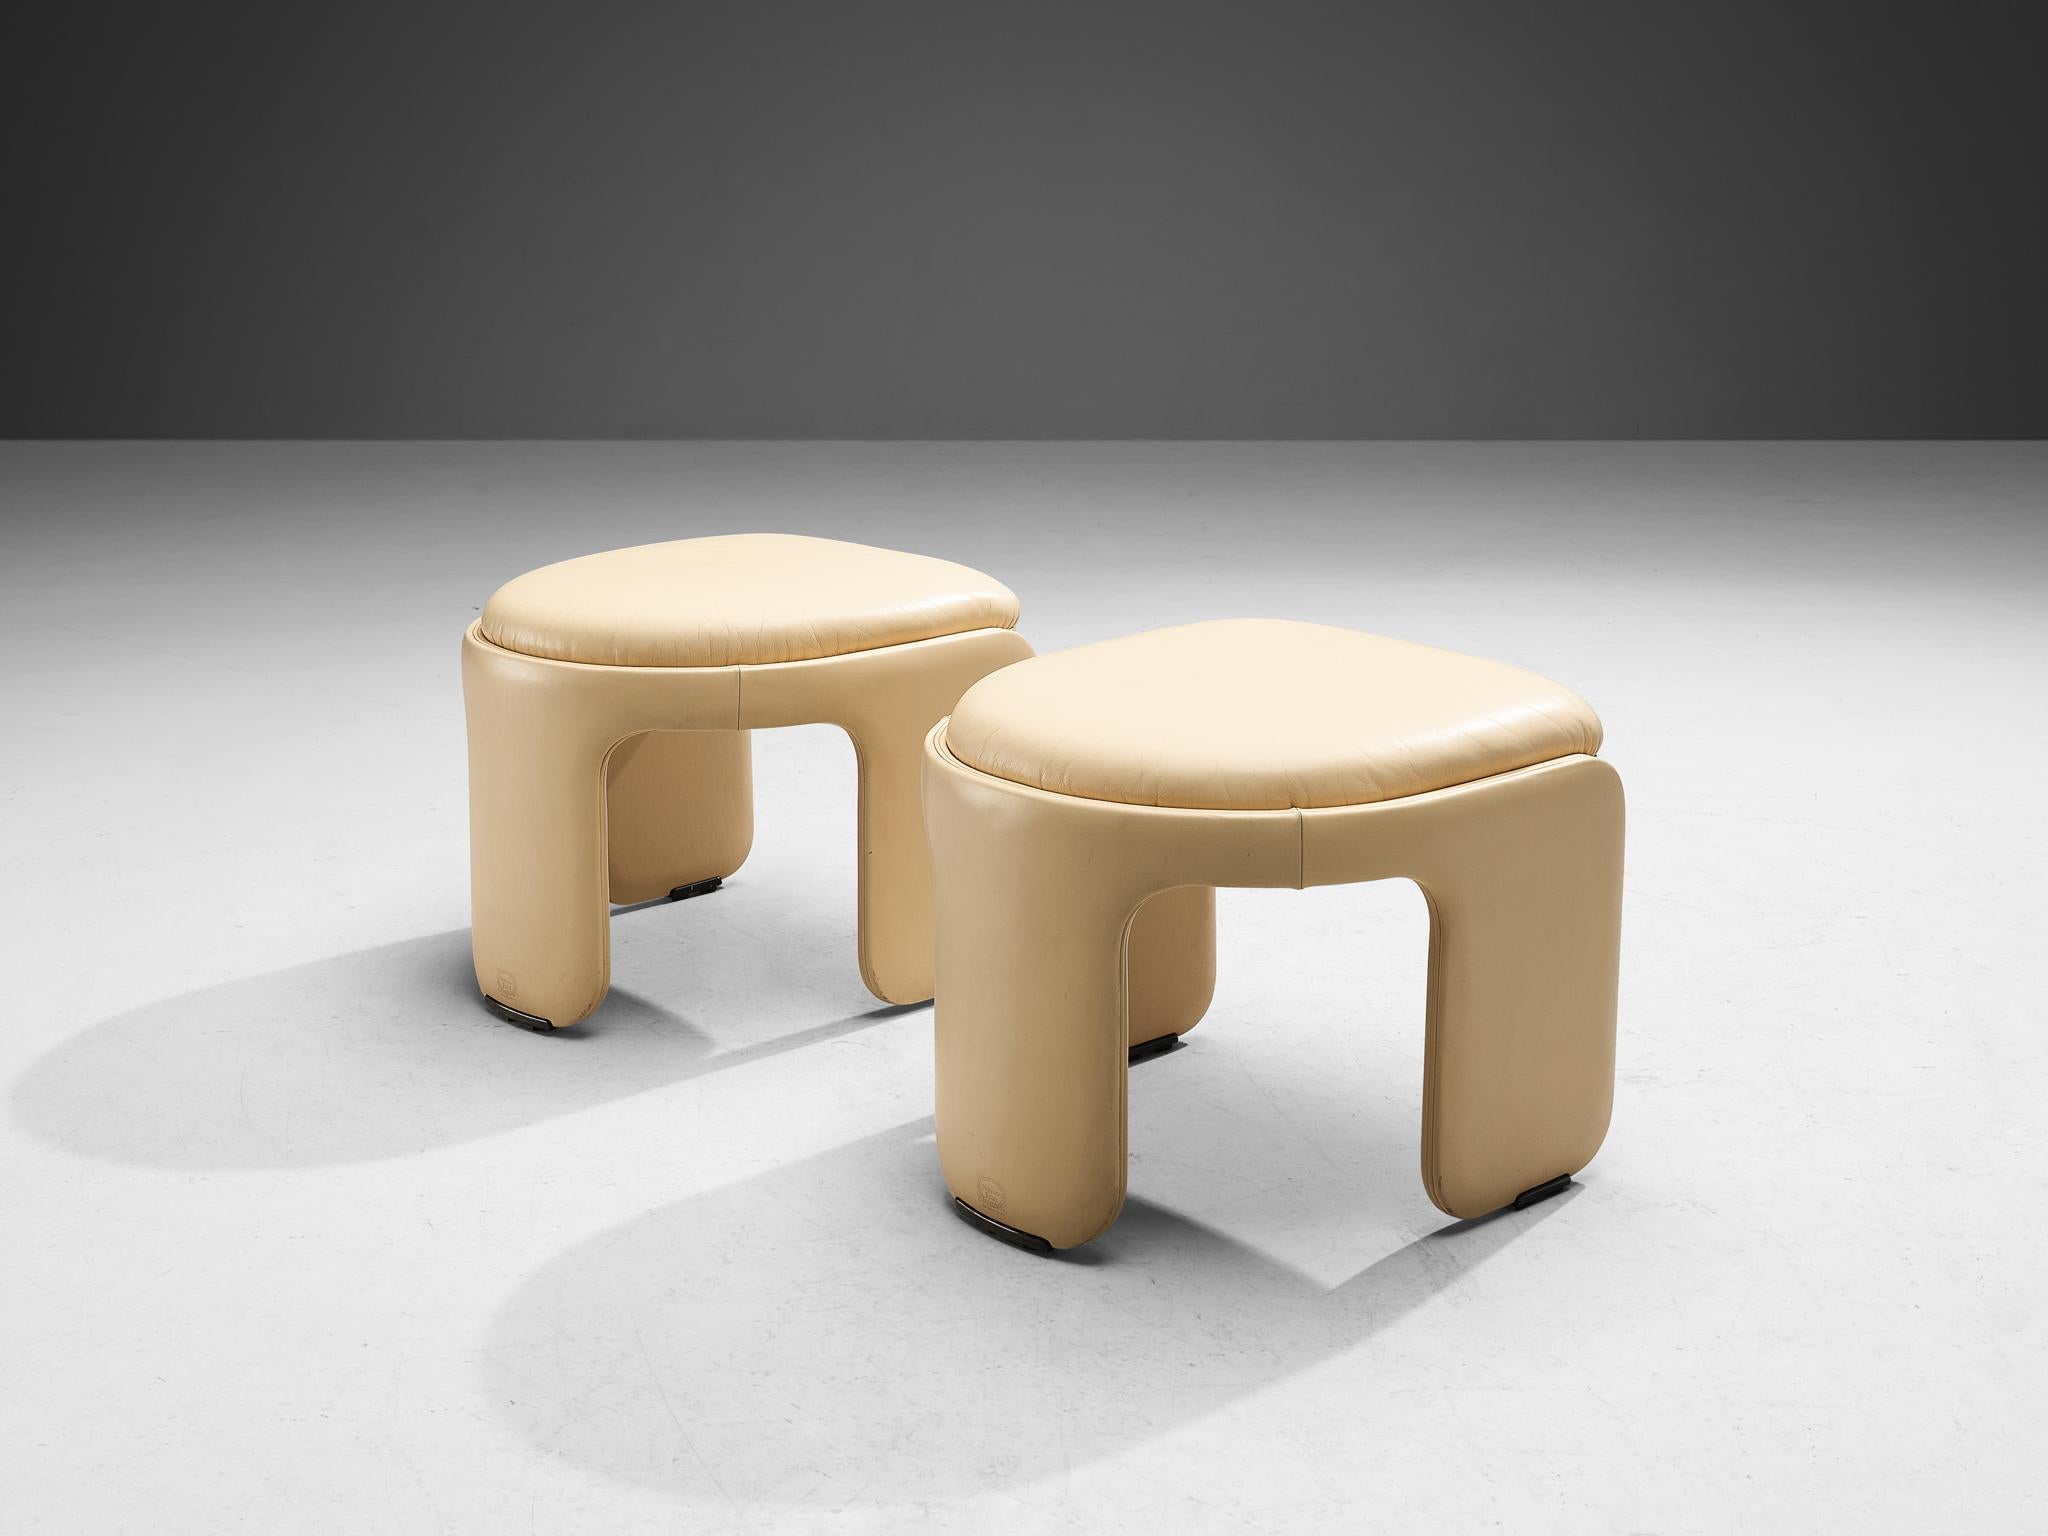 Luigi Massoni for Poltrona Frau, ottomans, model 'Dinette', leather, chromed steel, Italy, 1980s. 

This rare pair of ottomans epitomizes a splendid construction based on characteristic shapes and executed in a soft off-white leather. Therefore,